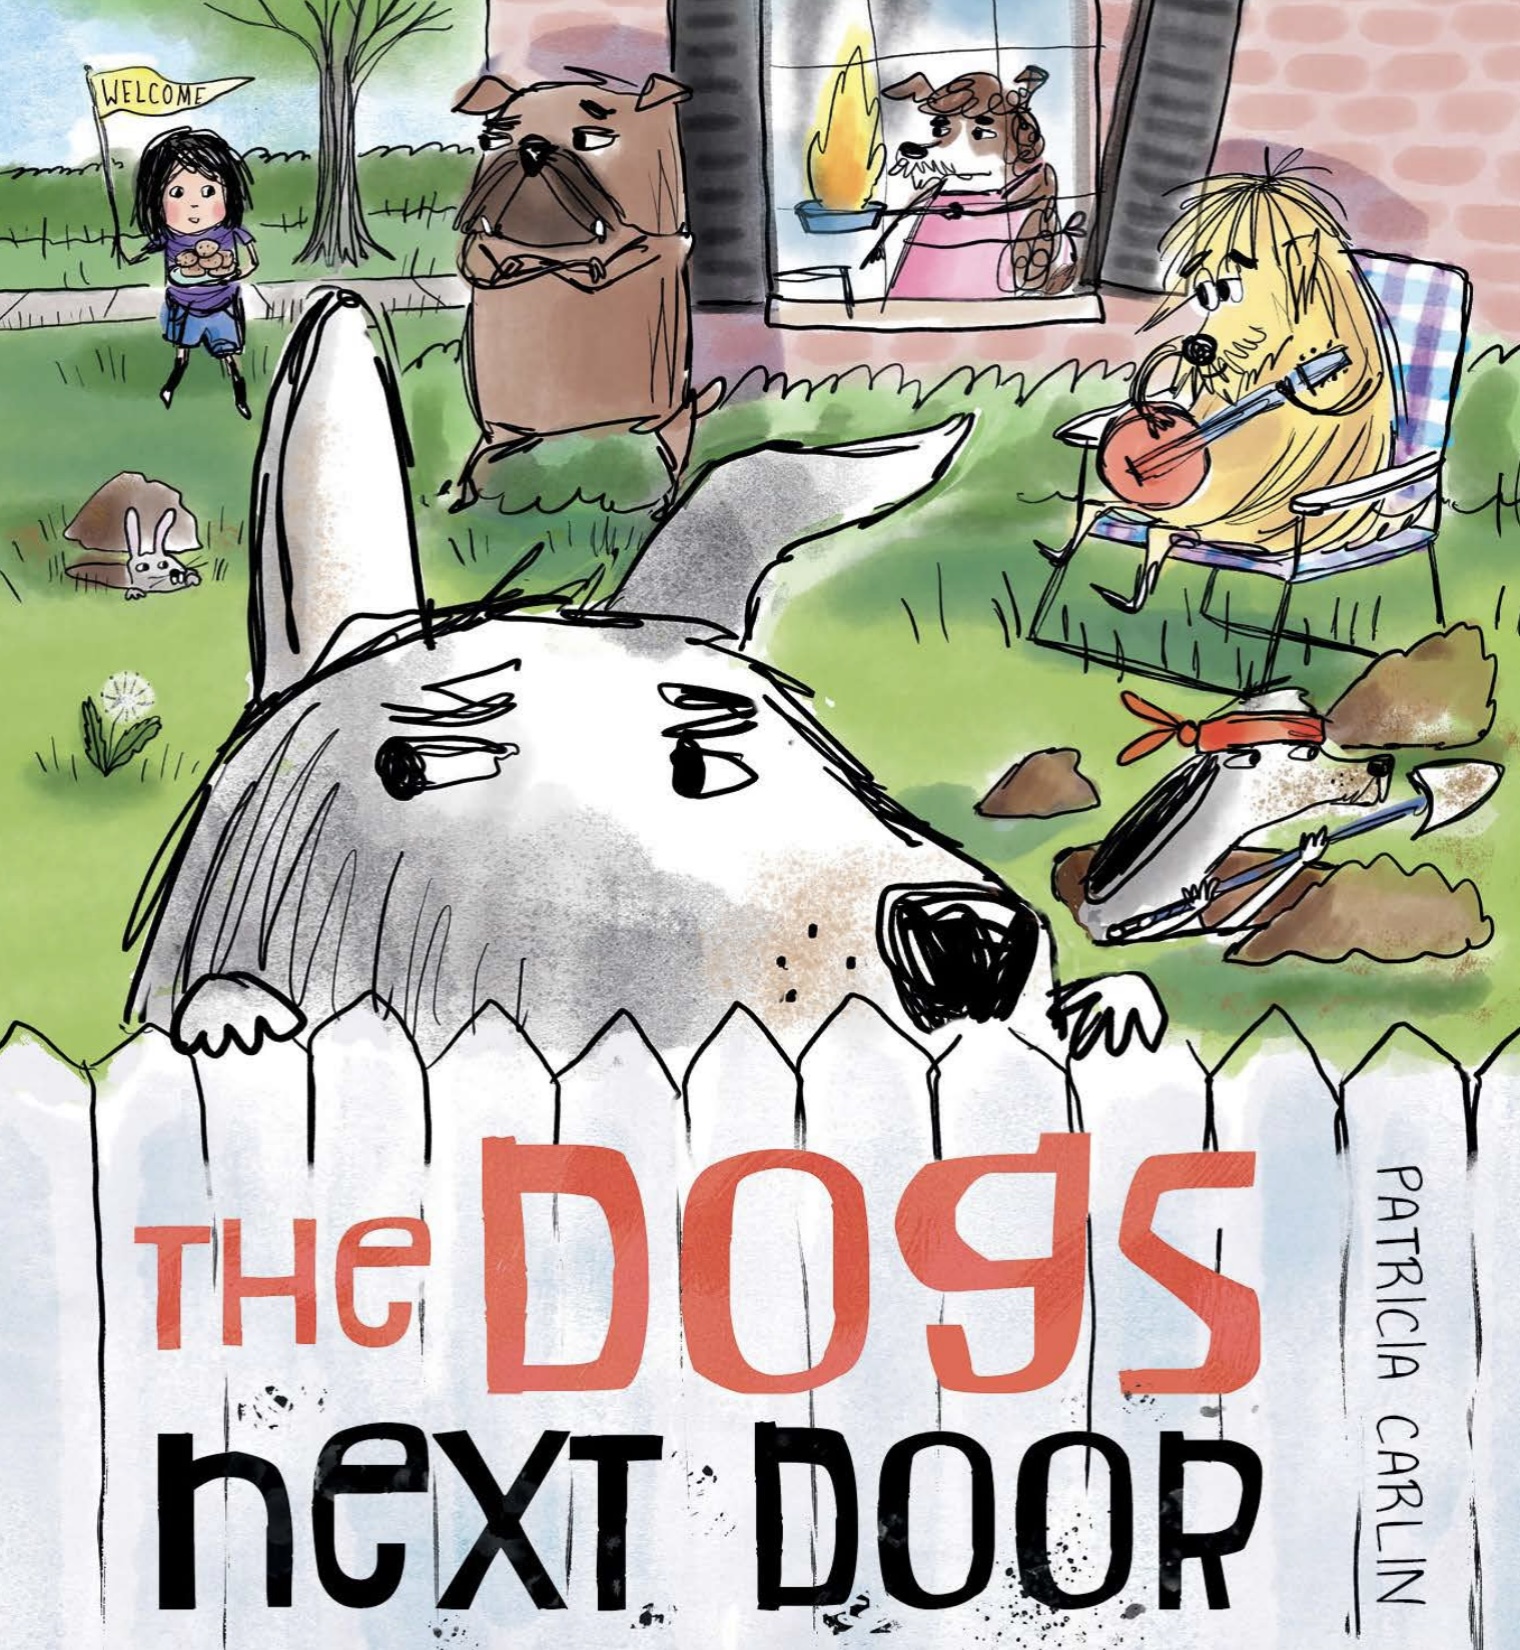 THE DOGS NEXT DOOR by Patricia Carlin book cover